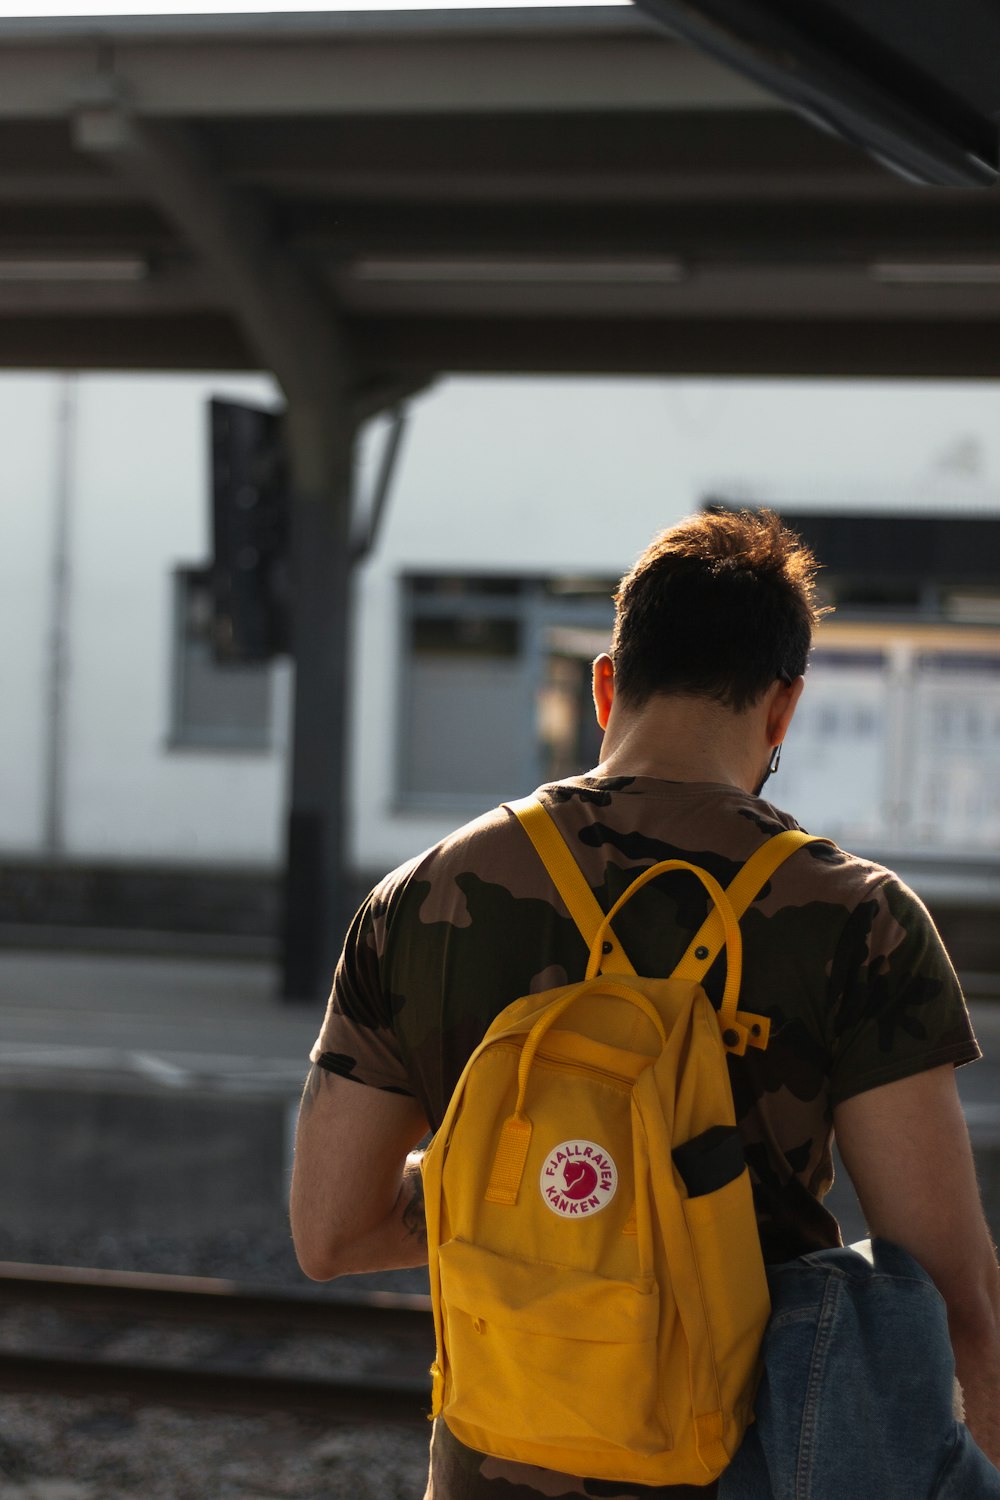 man carrying yellow backpack in train station